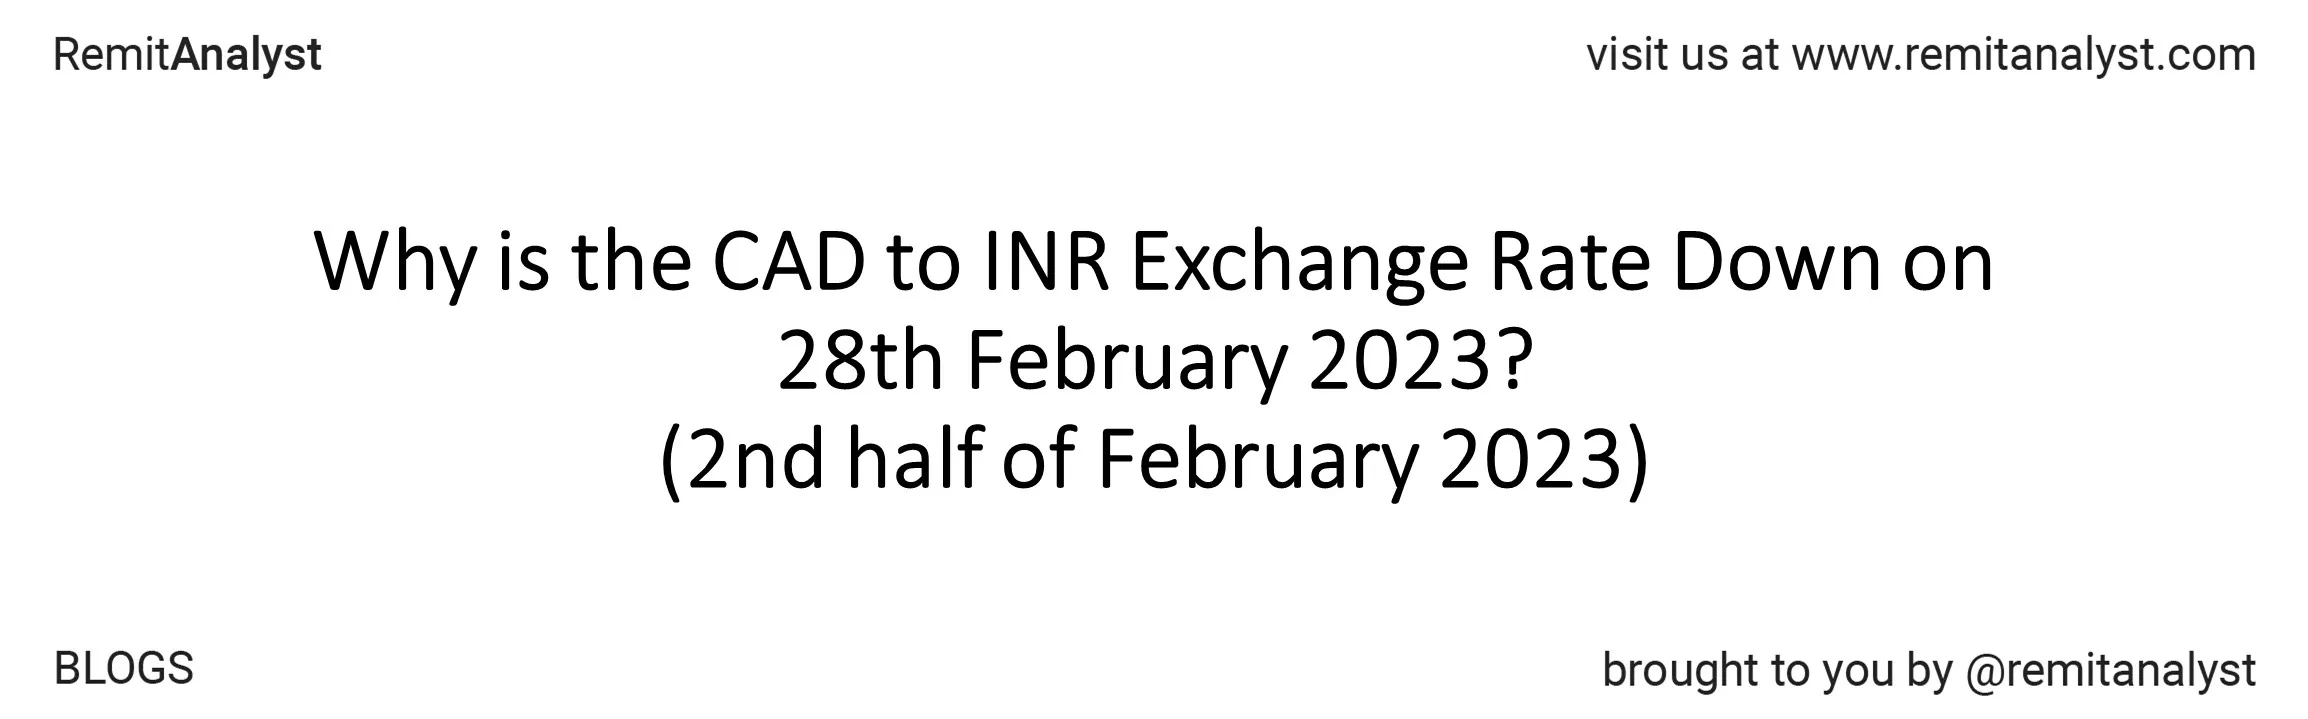 cad-to-inr-exchange-rate-from-16-feb-2023-to-28-feb-2023-title